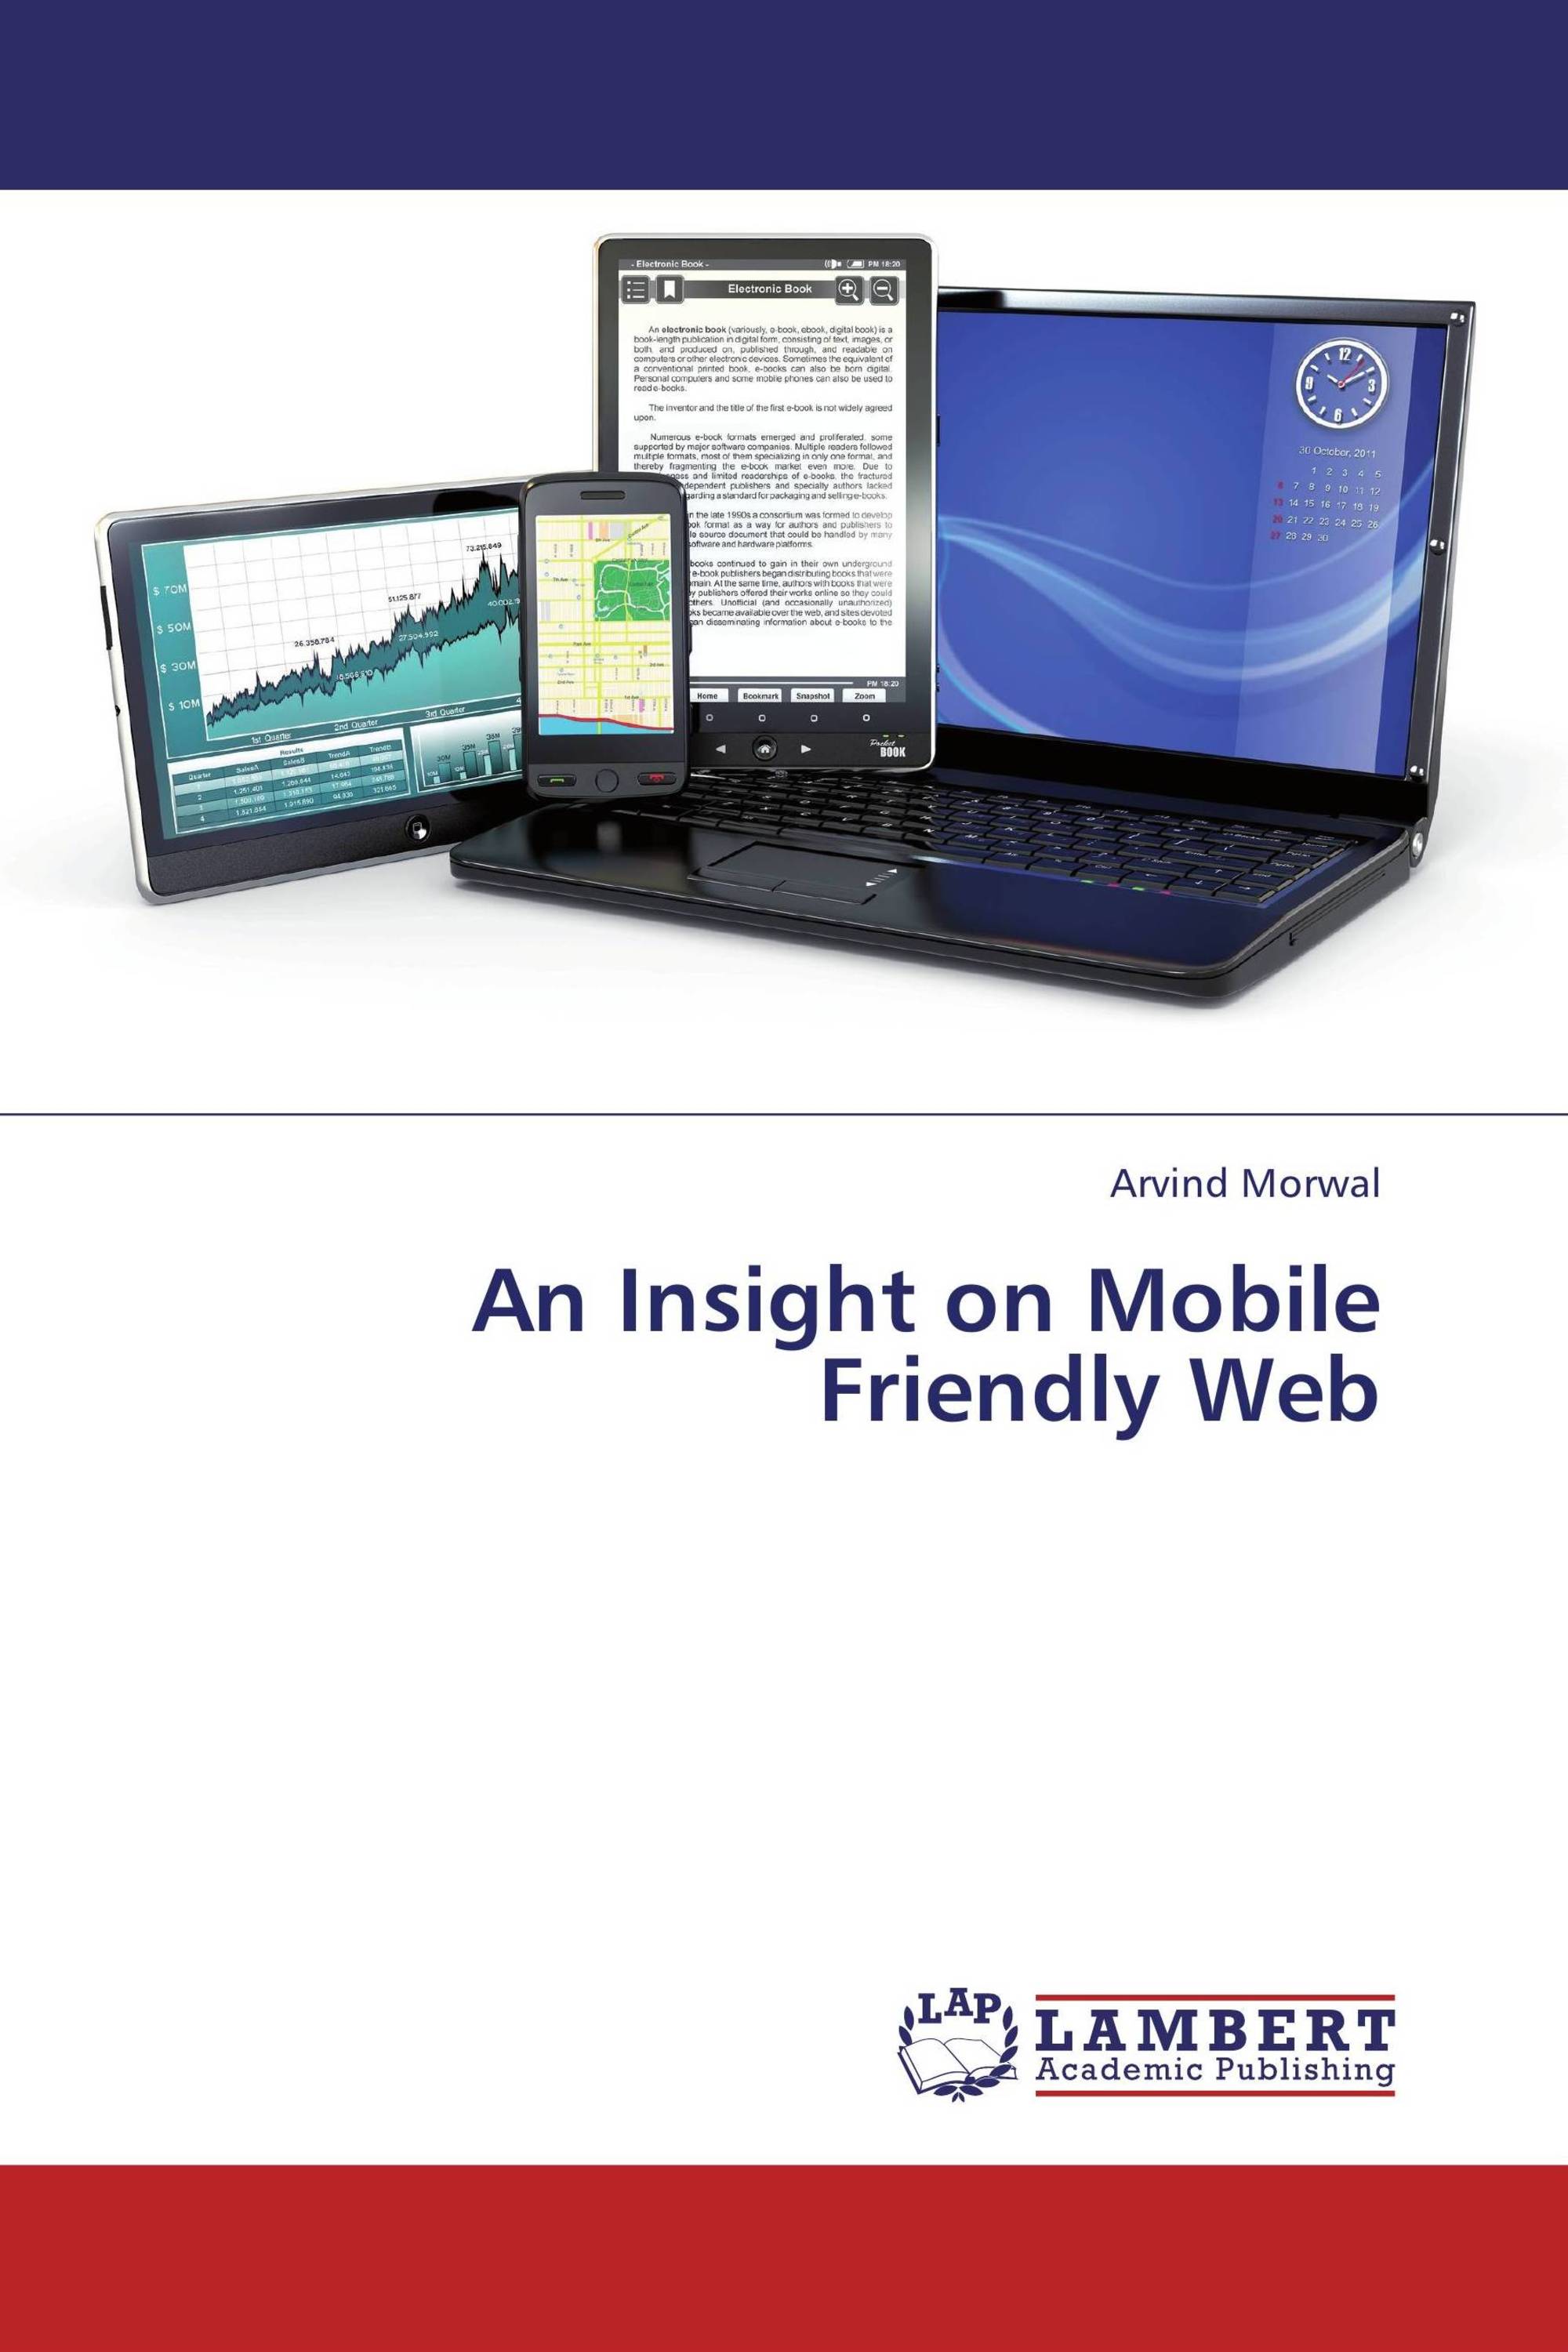 An Insight on Mobile Friendly Web